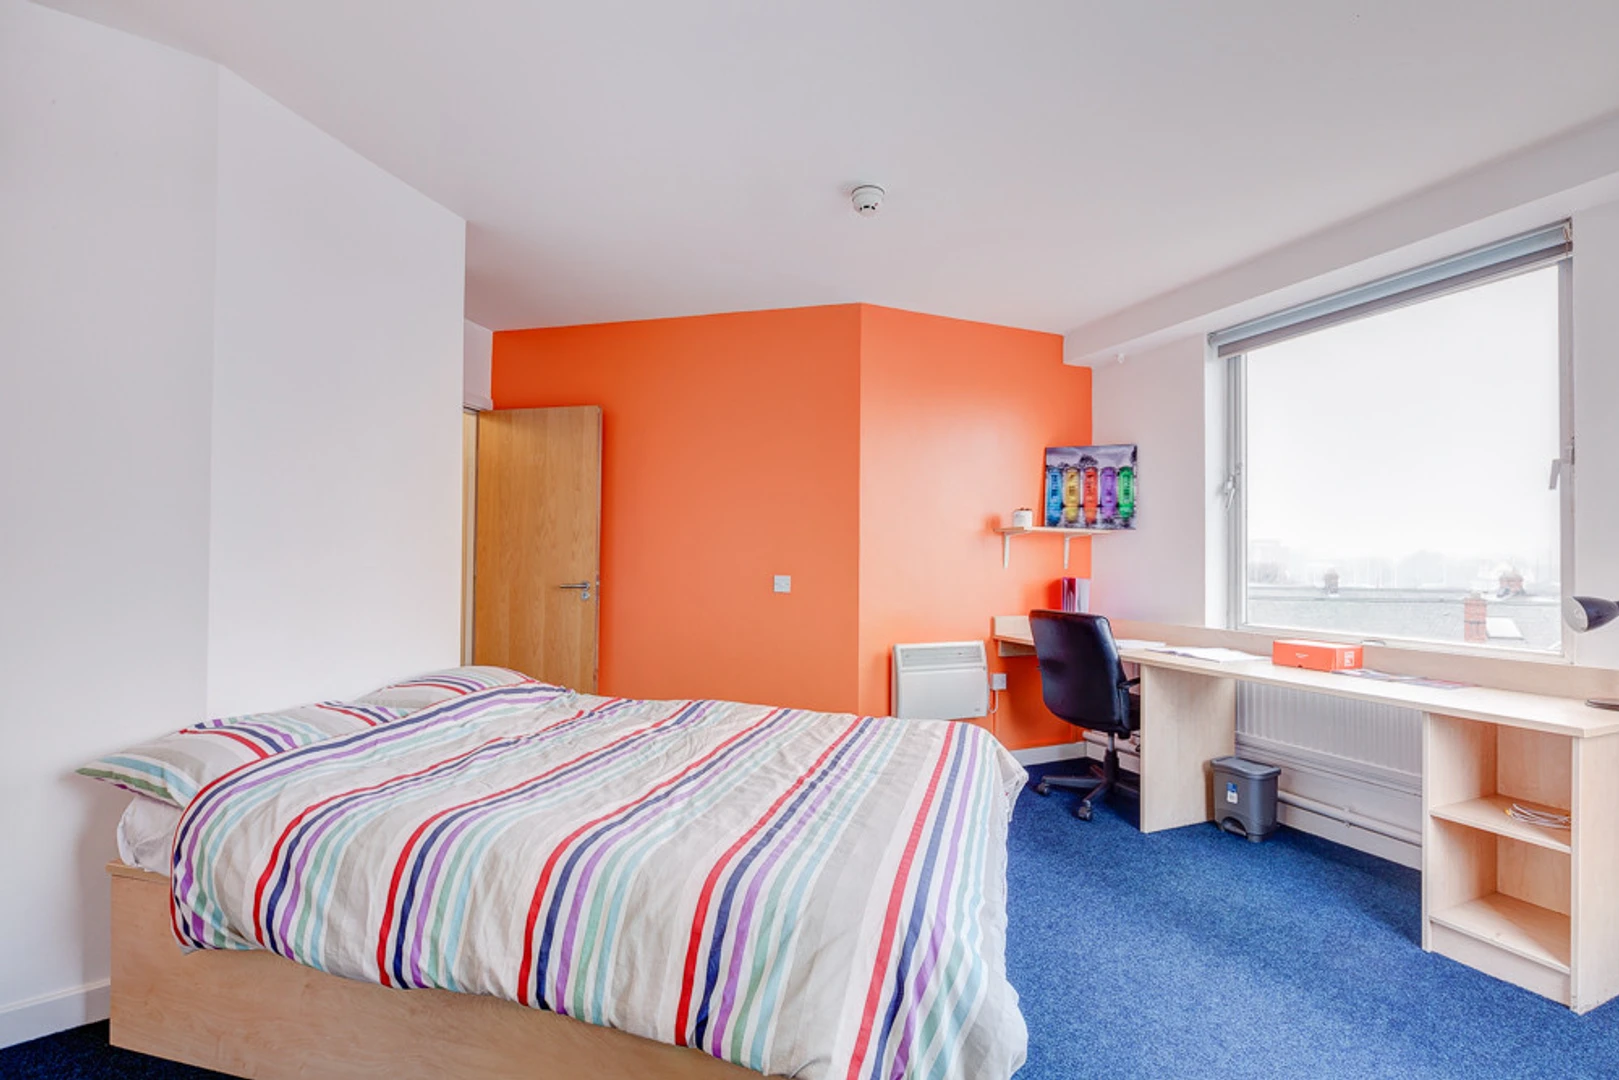 Renting rooms by the month in Sunderland